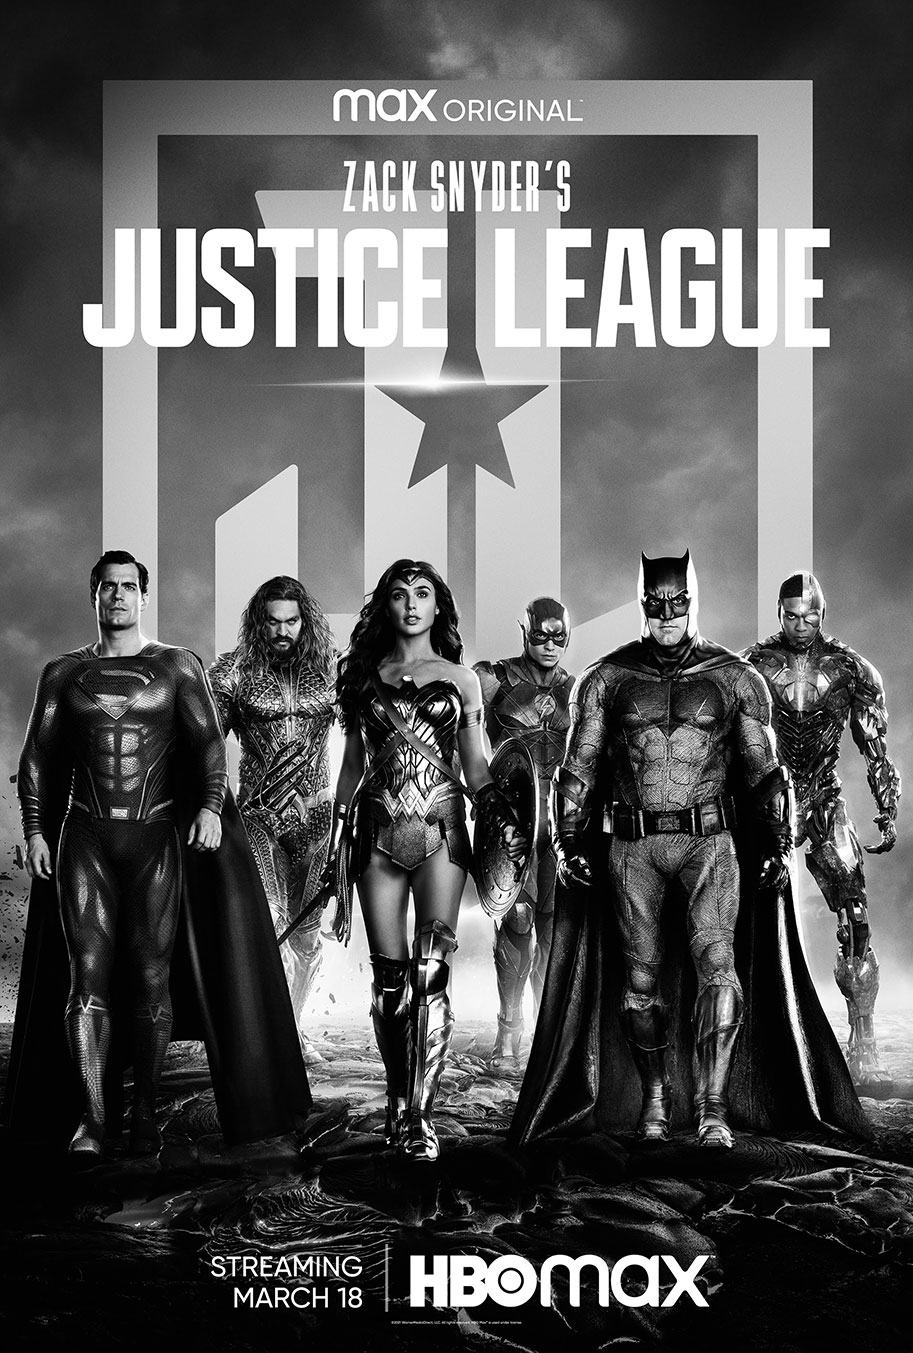 Justice League, Zack Snyder, Snyder Cut, sweepstakes, Foot Action, Foot Locker, HBO Max